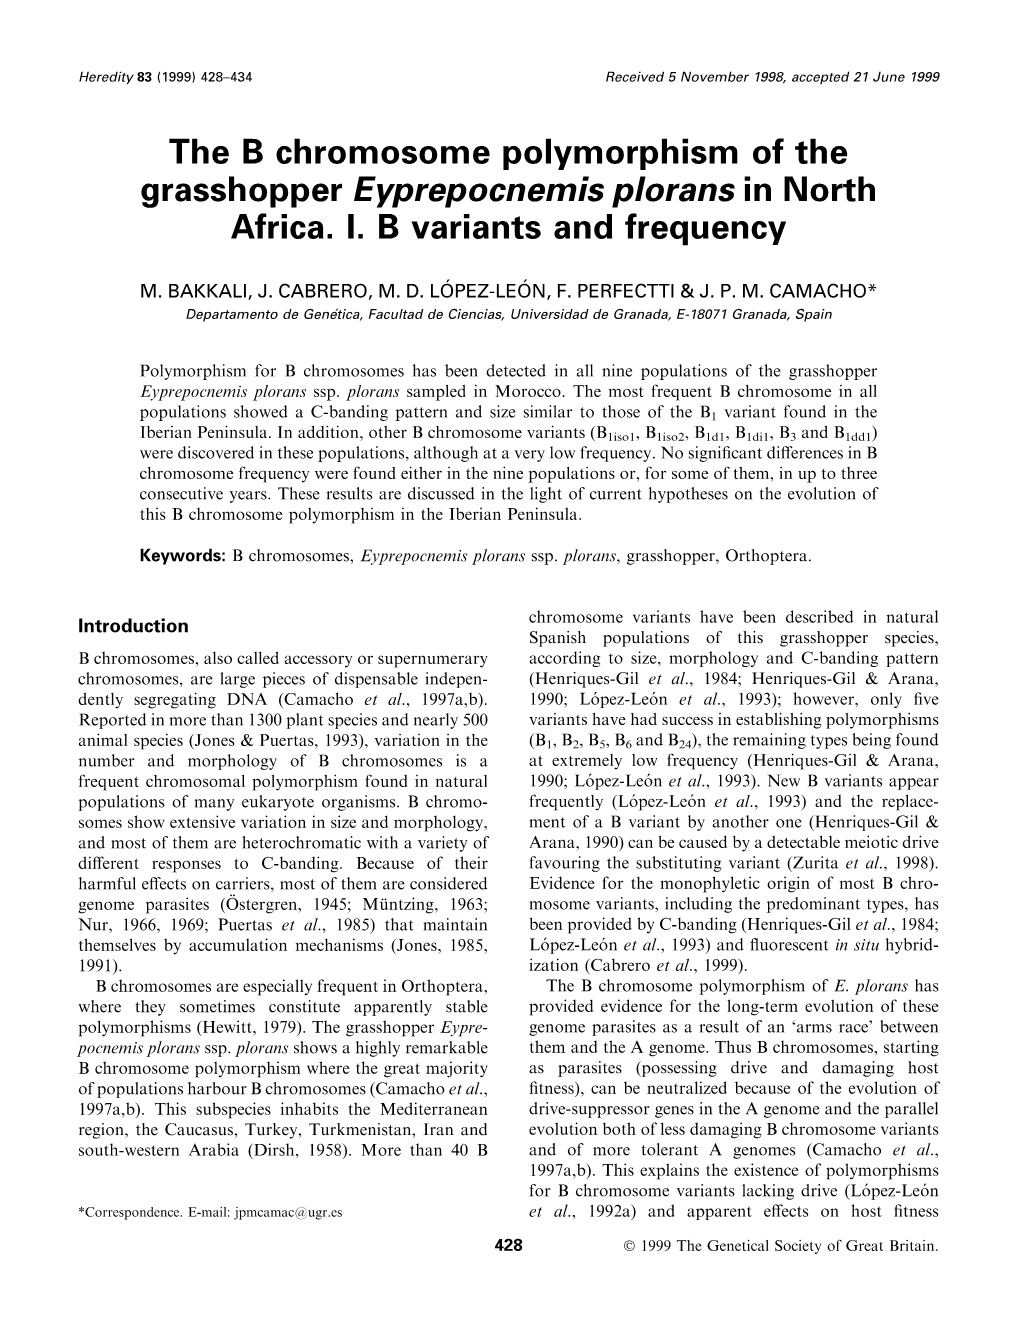 The B Chromosome Polymorphism of the Grasshopper Eyprepocnemis Plorans in North Africa. I. B Variants and Frequency